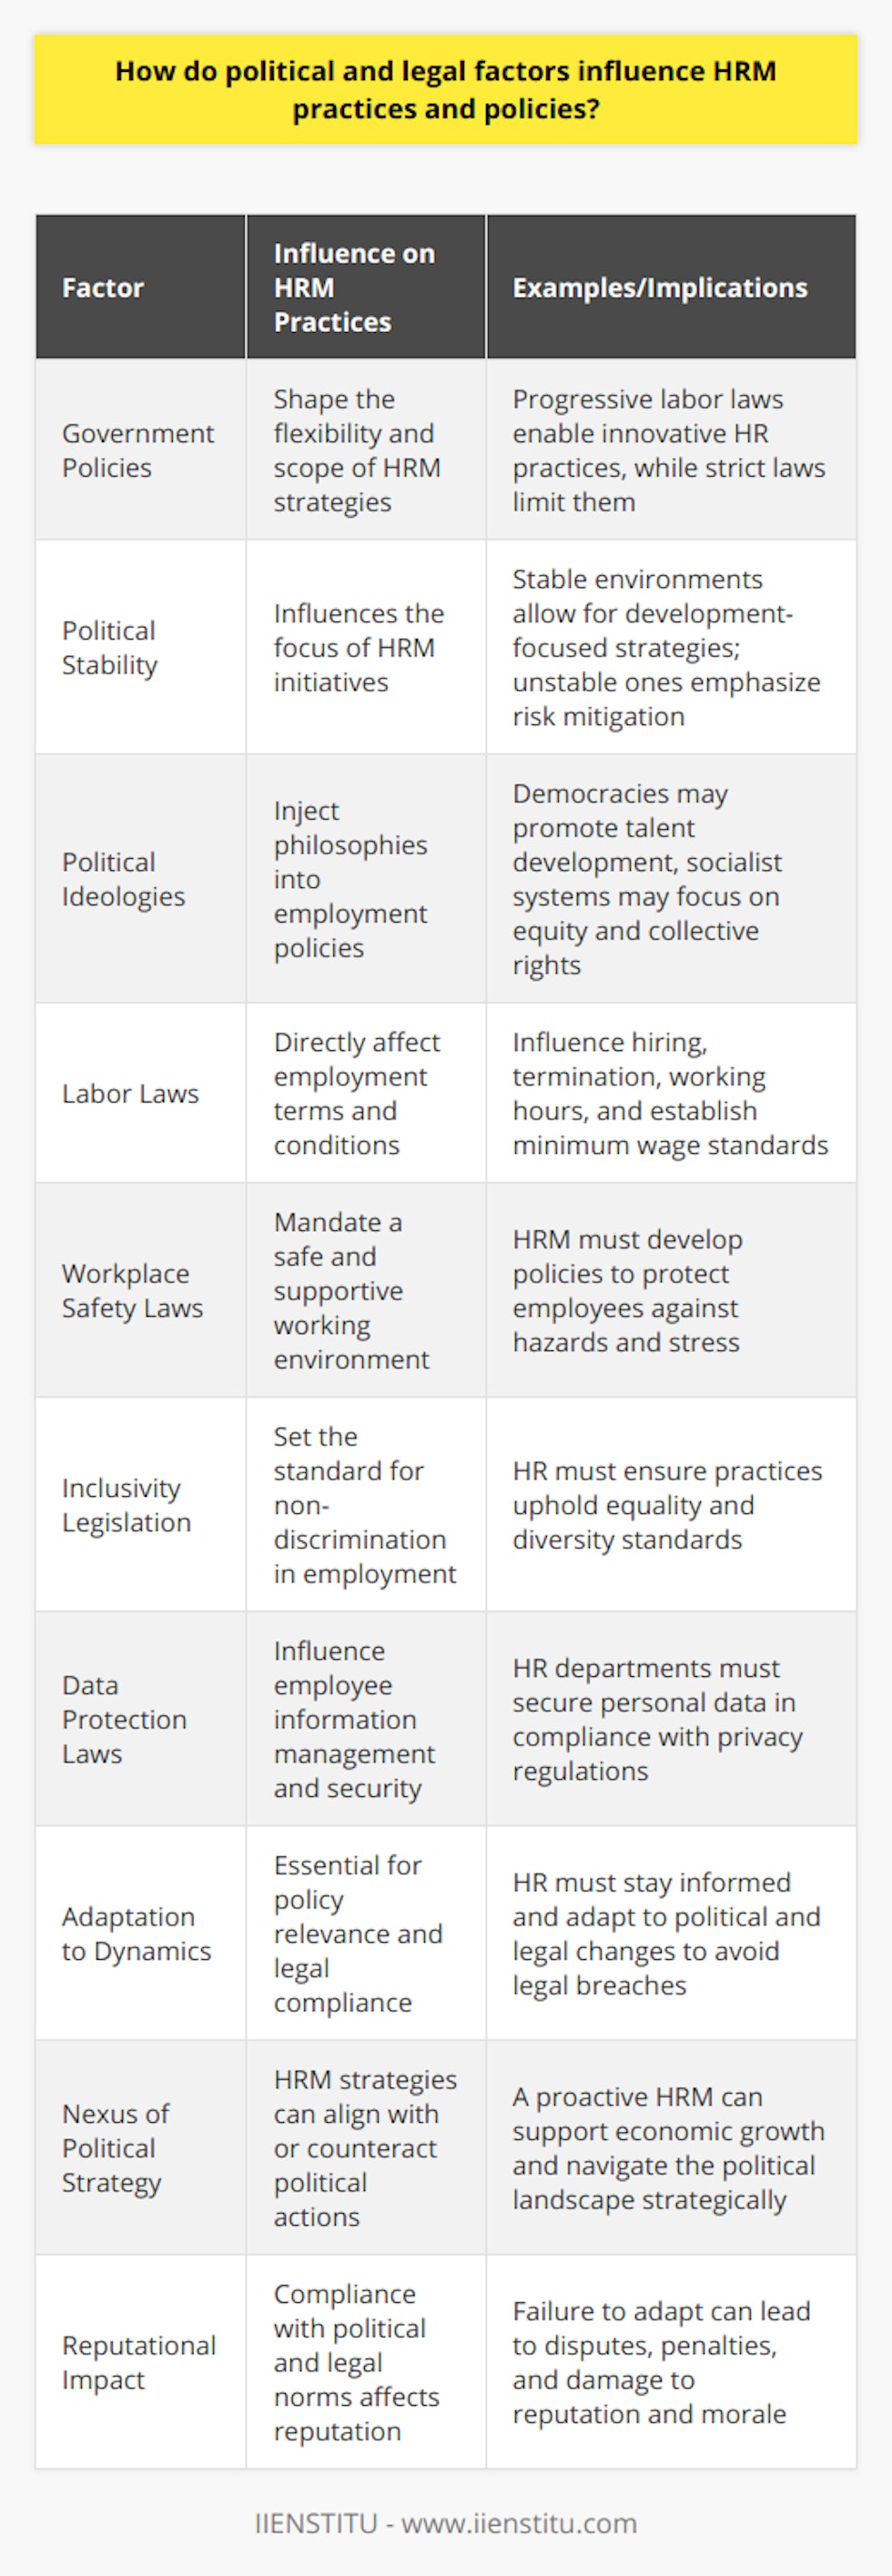 Political and legal factors are pivotal elements that shape how organizations manage their human resources. These factors inform and define the operational context within which businesses must act, ensuring compliance with statutory requirements.**Understanding Political Influences on HRM**Government policies can either facilitate or hinder the expansion of HRM practices. For example, in countries with progressive labor laws, HR departments might have more flexibility in implementing innovative workforce management strategies. Conversely, in nations where political scenarios favor stringent labor laws, HR practices must be tailored to adhere strictly to regulatory mandates to avoid sanctions.Political stability, or lack thereof, plays a substantial role too. In stable environments, HRM practices can be more forward-looking and development-oriented. In politically volatile regions, HRM strategies might focus more on risk mitigation and contingency planning, ensuring organizational resilience.Different political ideologies inject varying philosophies into employment policies. Democracies often encourage proactive HRM practices, including talent development and employee engagement, while socialist systems might lead to policies focused on equity and collective bargaining.**Legal Factors: Directives for HRM Policies**Legal constructs provide the framework for HRM operations. Organizations must navigate complex legal terrains, especially those spread across multiple countries. Labor laws, for instance, affect hiring practices, termination procedures, and employment terms. Observance of minimum wage legislation is non-negotiable, enforcing ethical pay standards.Equally important are workplace safety laws. HRM departments are tasked with designing and maintaining policies that protect employees from physical harm and psychological stress, thus fostering a safe and supportive working environment.Inclusivity is another area under legal scrutiny, with non-discrimination and equality laws establishing the standard that organizations must uphold in their employment practices. Data protection and privacy laws also affect how HR departments manage and secure employee information.**Navigating Through Political and Legal Dynamics**To effectively manage their workforce, organizations must be adept at adapting their HRM practices to the latest political and legal developments. This requires a proactive approach to policy formulation and implementation, with HR professionals staying informed about the evolving regulatory landscape. This vigilance safeguards the company against inadvertent legal breaches and the reputational damage that could ensue.**HRM: A Nexus of Political Strategy**The relationship between politics and HRM is intricate and significant. Political actions can dramatically impact HRM strategies, making it imperative for HR professionals to understand and, when feasible, anticipate political trends. A symbiotic relationship between government and private entities, with HRM serving as a bridge, can facilitate shared objectives and contribute to economic growth.**Closing Thoughts**The interplay between political and legal environments and HR practices cannot be overstated. These external forces dictate what is permissible, advisable, and beneficial in the context of human resource management. An organization's ability to deftly navigate these factors does not merely ensure compliance but can also confer a strategic advantage. Failing to adapt HRM policies to these influences can result in costly legal disputes, financial penalties, and harm to both the organization's reputation and its most valuable asset – its people.